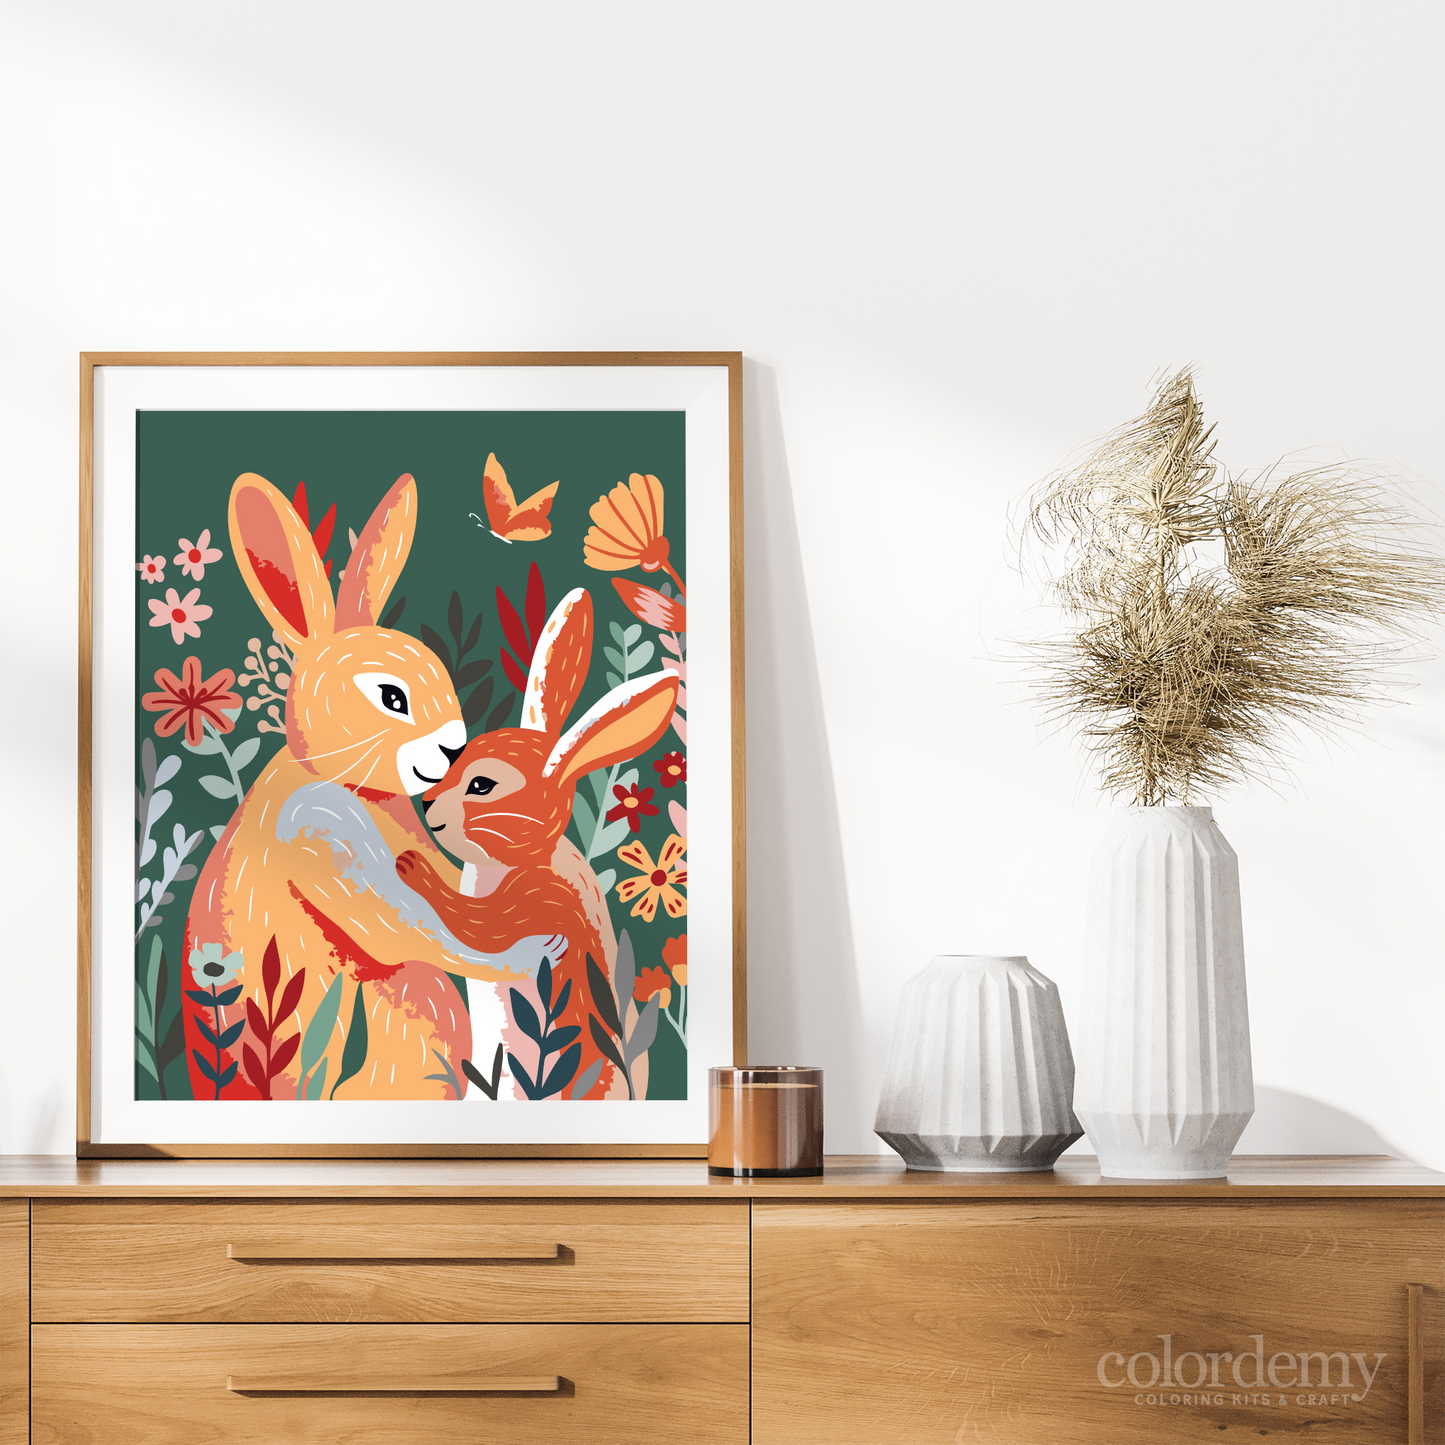 40x50cm Paint by Numbers Kit: Easter Blossoms - Mother-Daughter Rabbit Duo